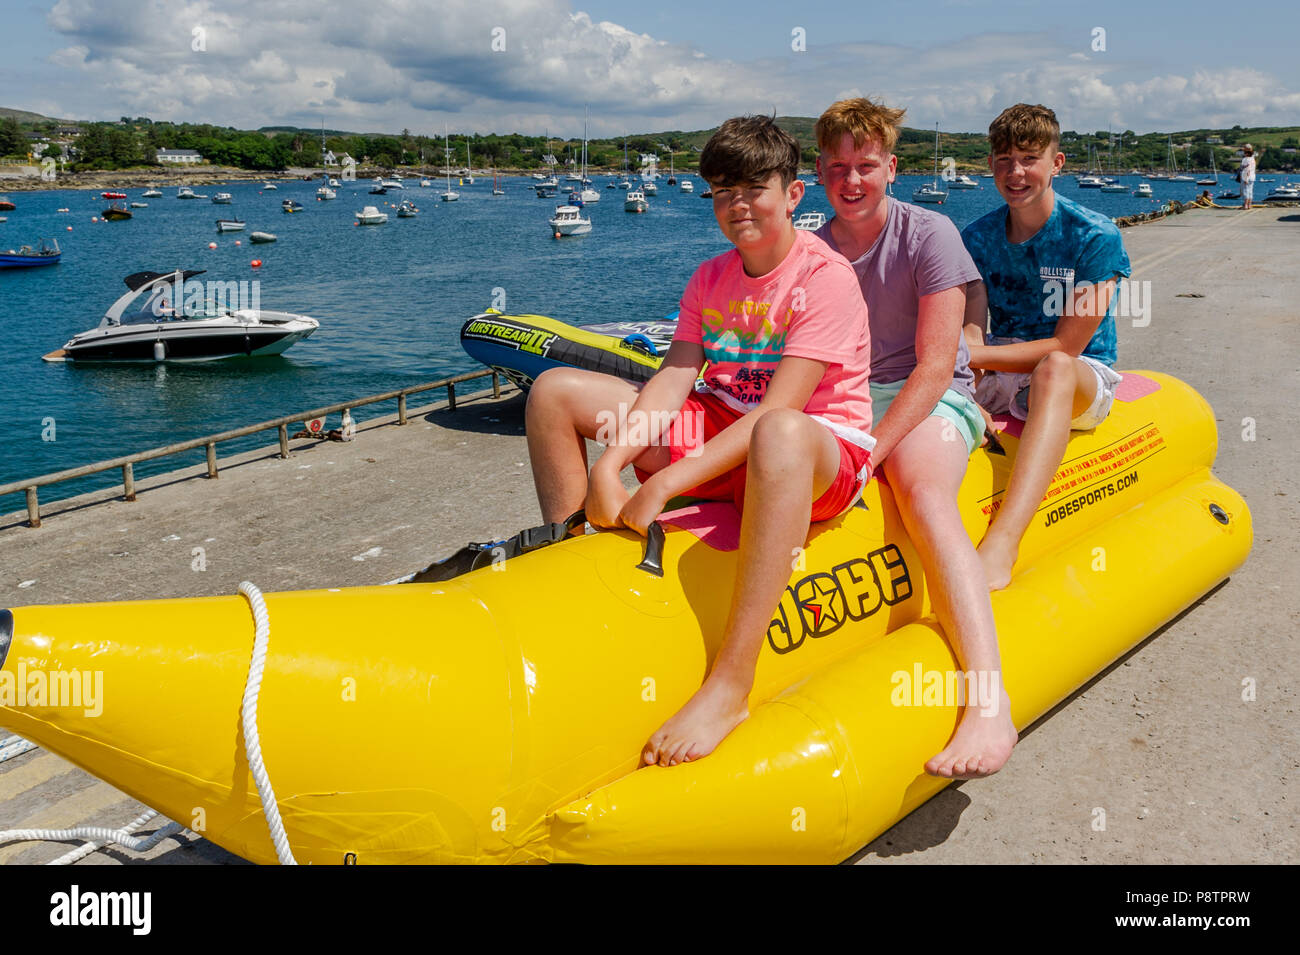 Schull, West Cork, Ireland. 13th July, 2018. Making the most of the hot weather and sitting astride a towable inflatable preparing to have some fun in the water in Schull Harbour are Jamie Donnelly, Tom Casey and Jeremy Kingston, all from Cork city. The rest of the day will have highs of 20° Celsius but the rest of the weekend will be cooler with rain forecast for Sunday. Credit: Andy Gibson/Alamy Live News. Stock Photo